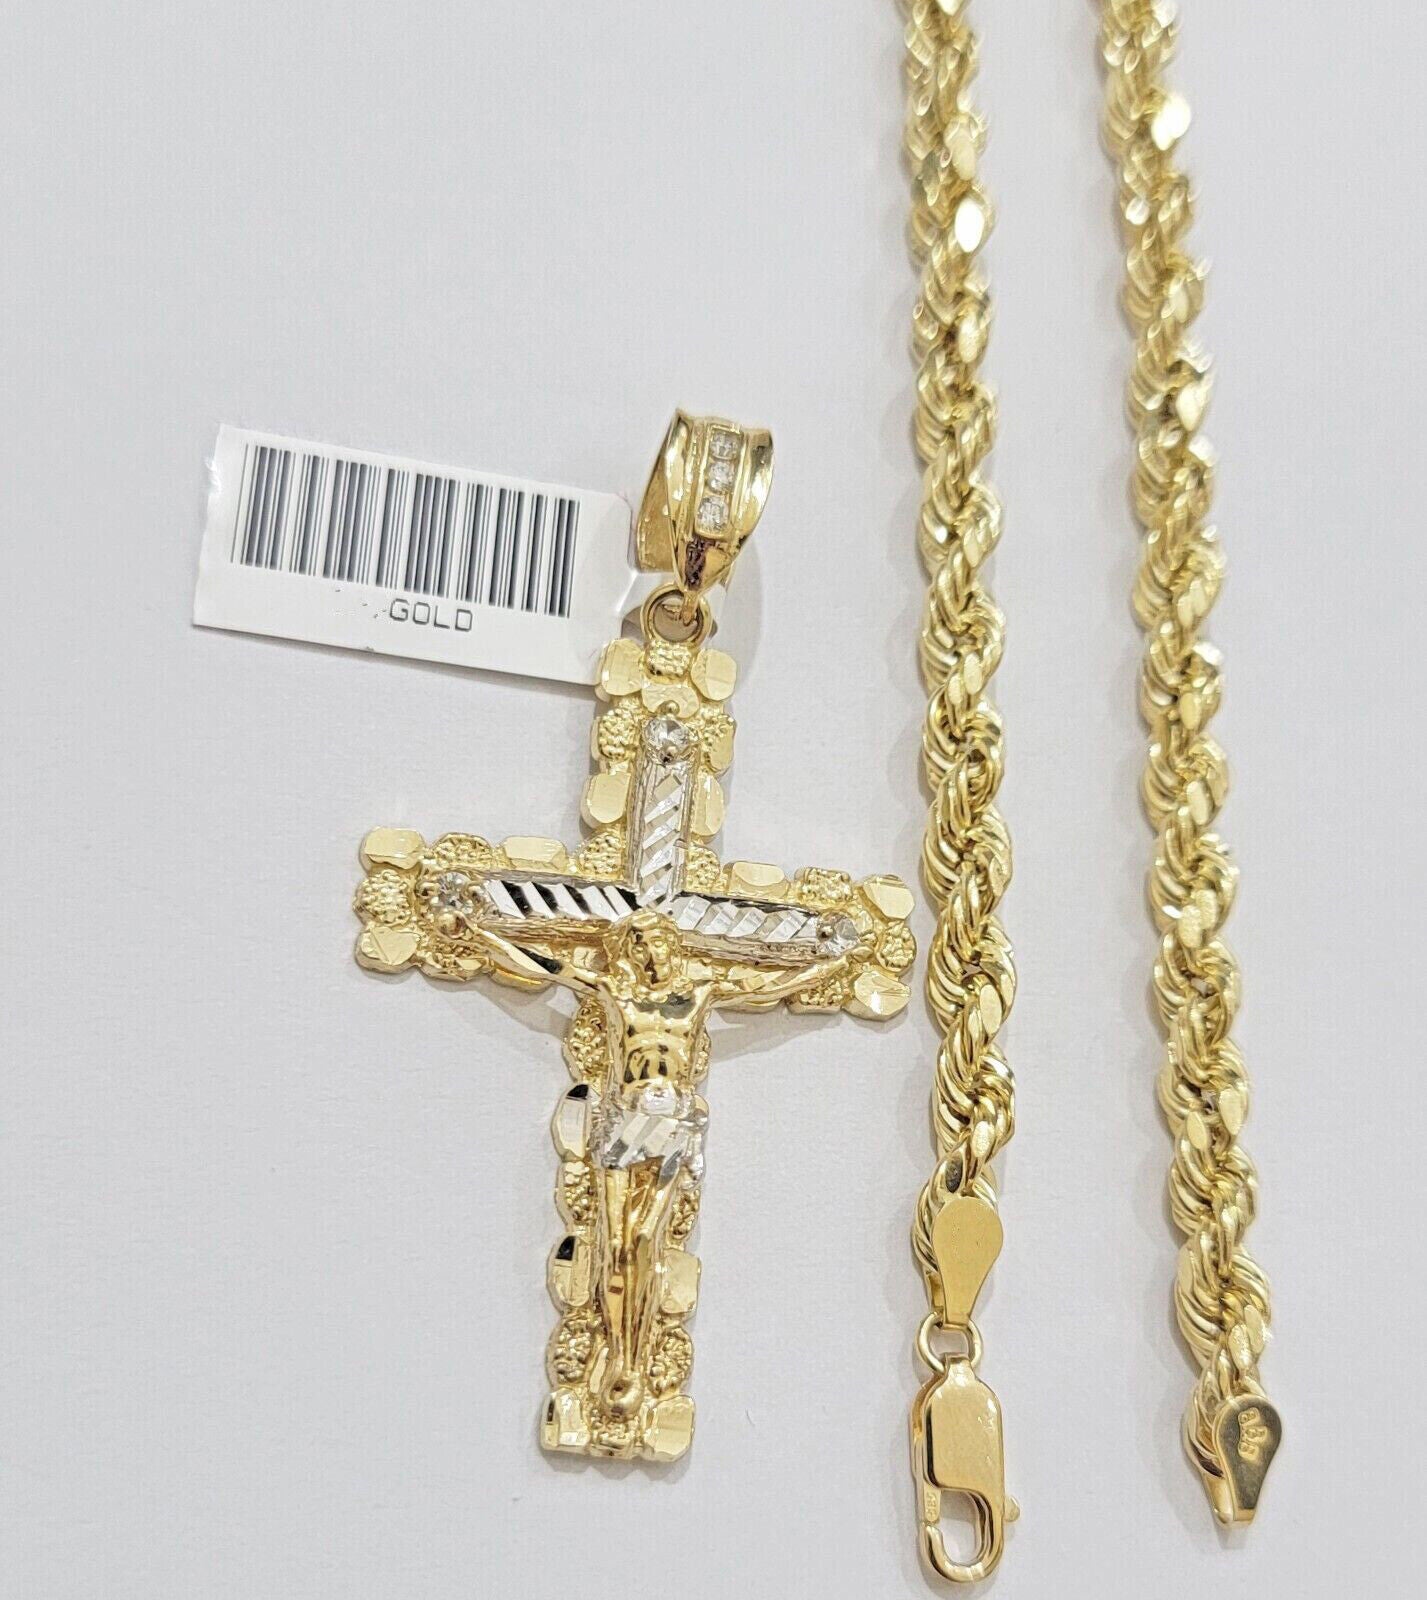 Real 10k Gold Rope 24 inch Chain Jesus Cross Charm Pendant Set 5mm Necklace Mens